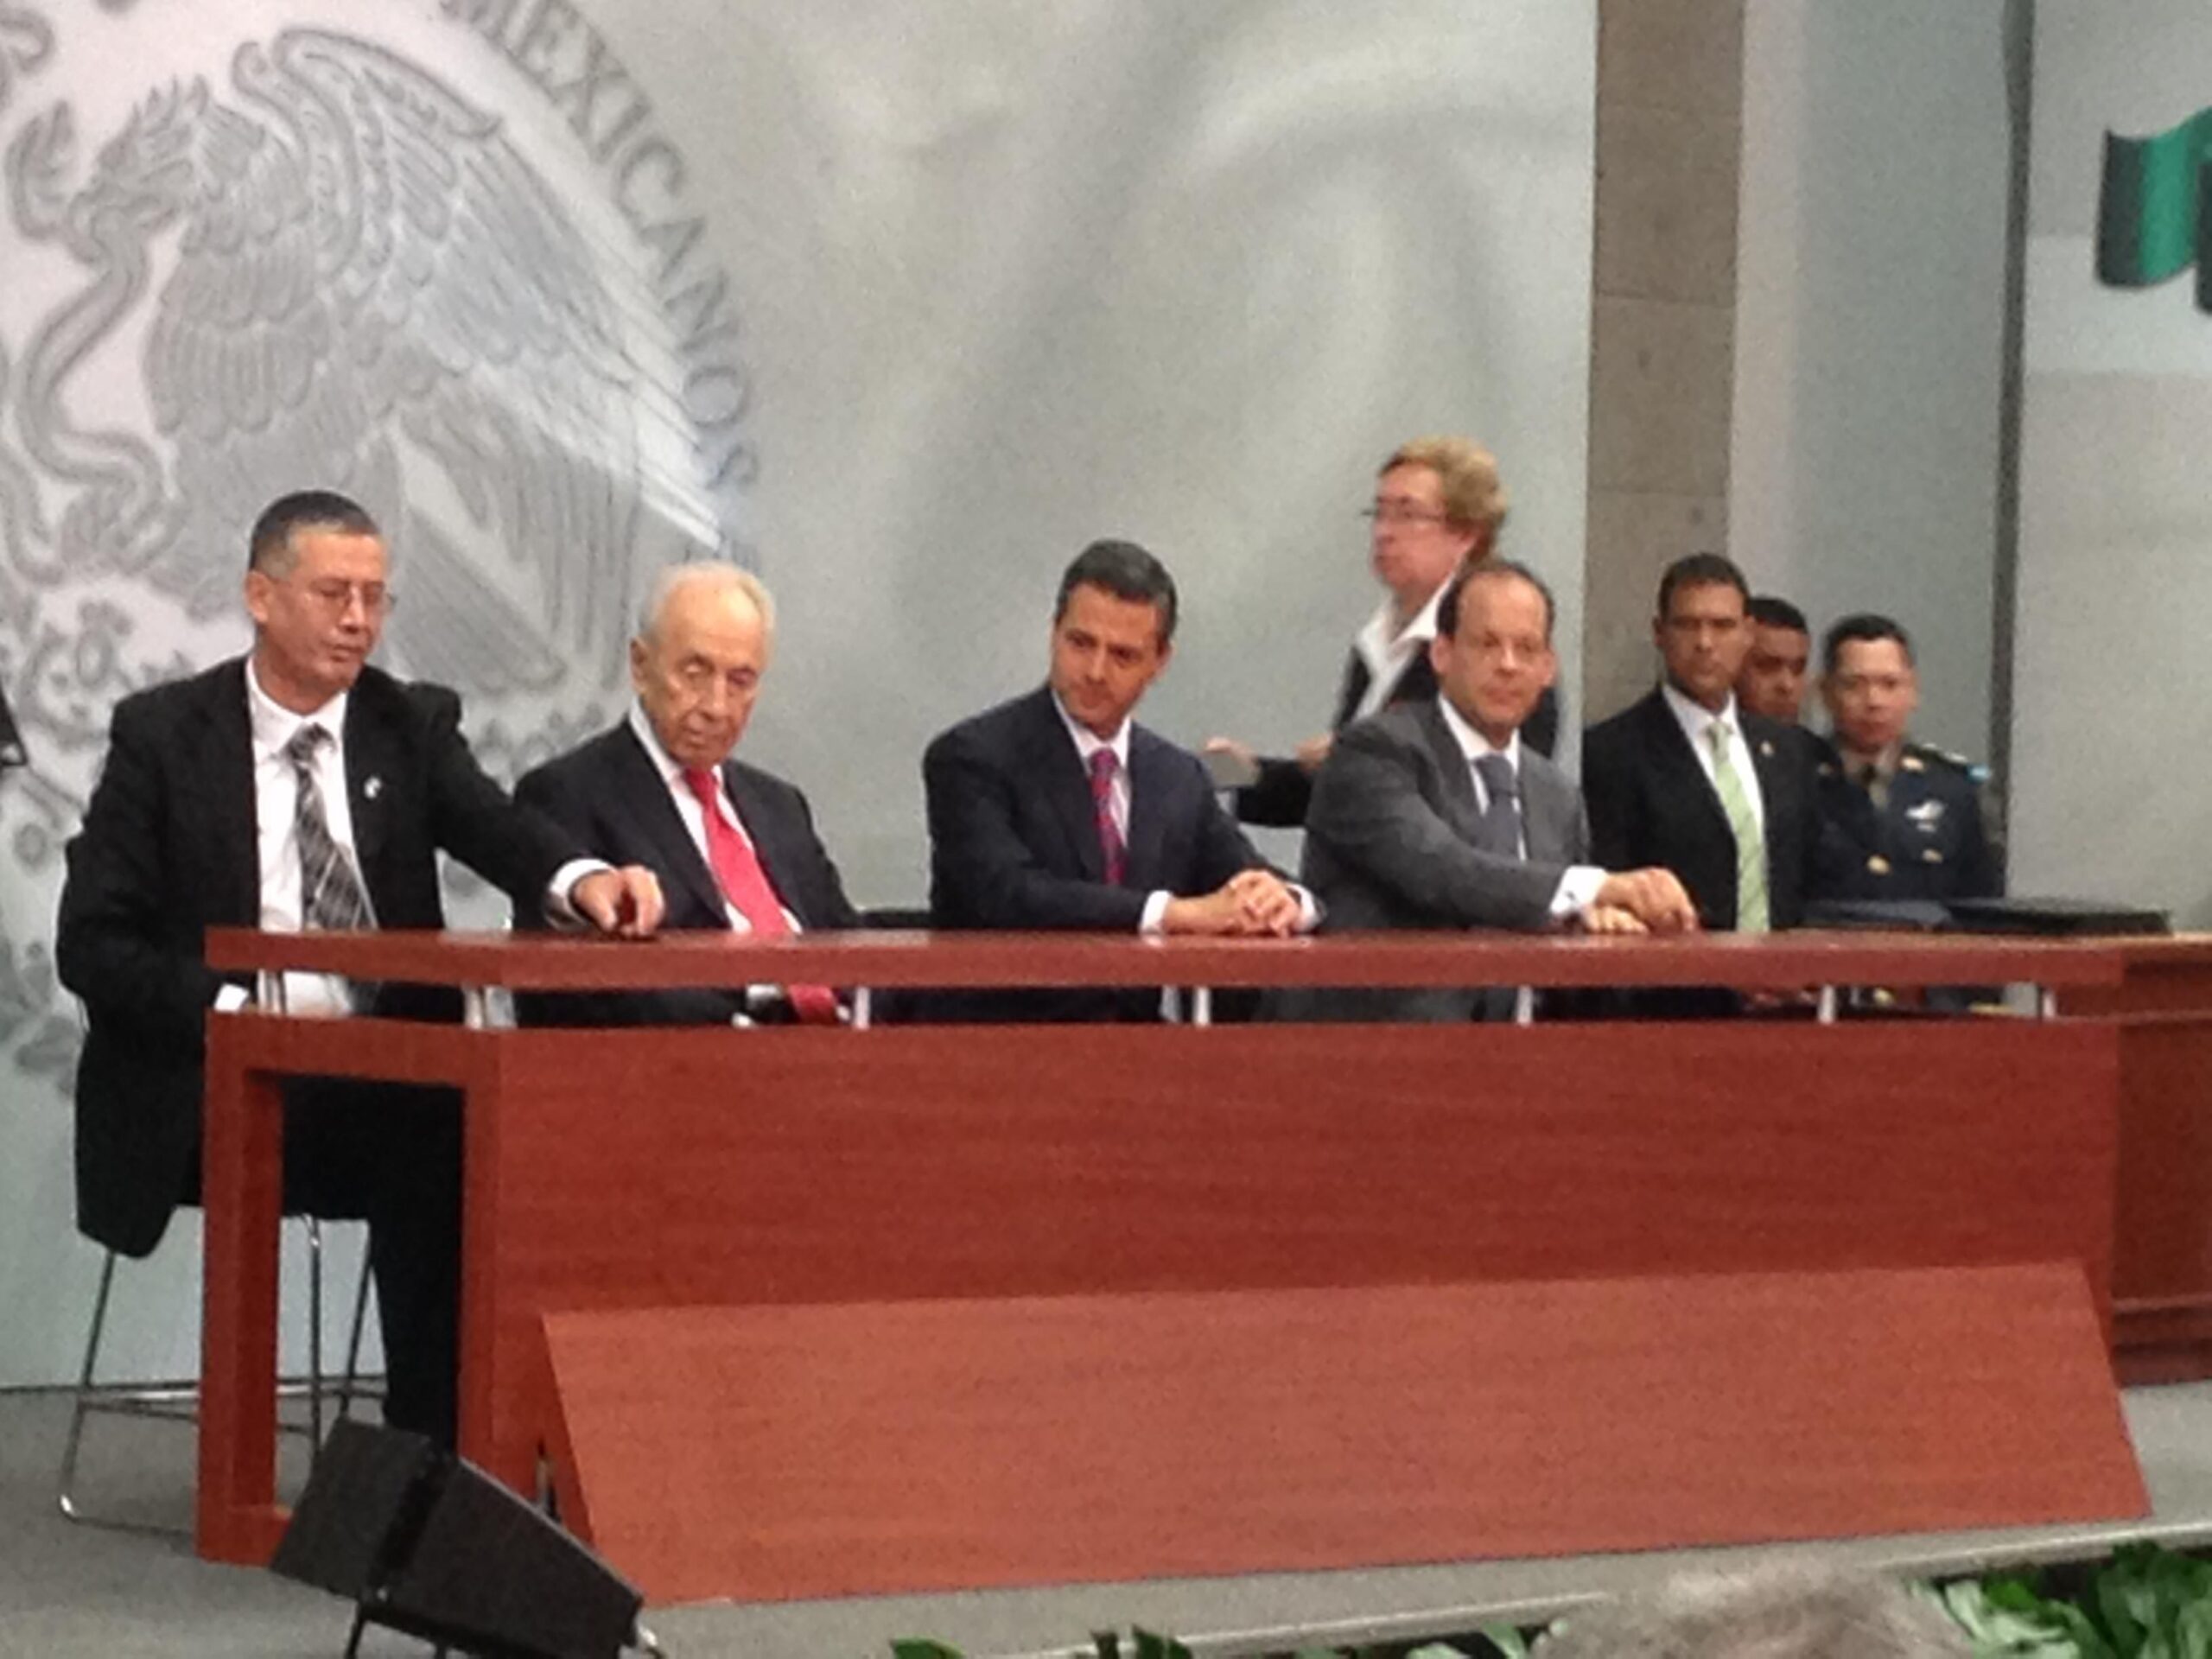 Mekorot CEO Shimon Ben Hamo and Israel's President Shimon Peres at the signing of a cooperation agreement in Mexico. (Courtesy of Mekorot Group)